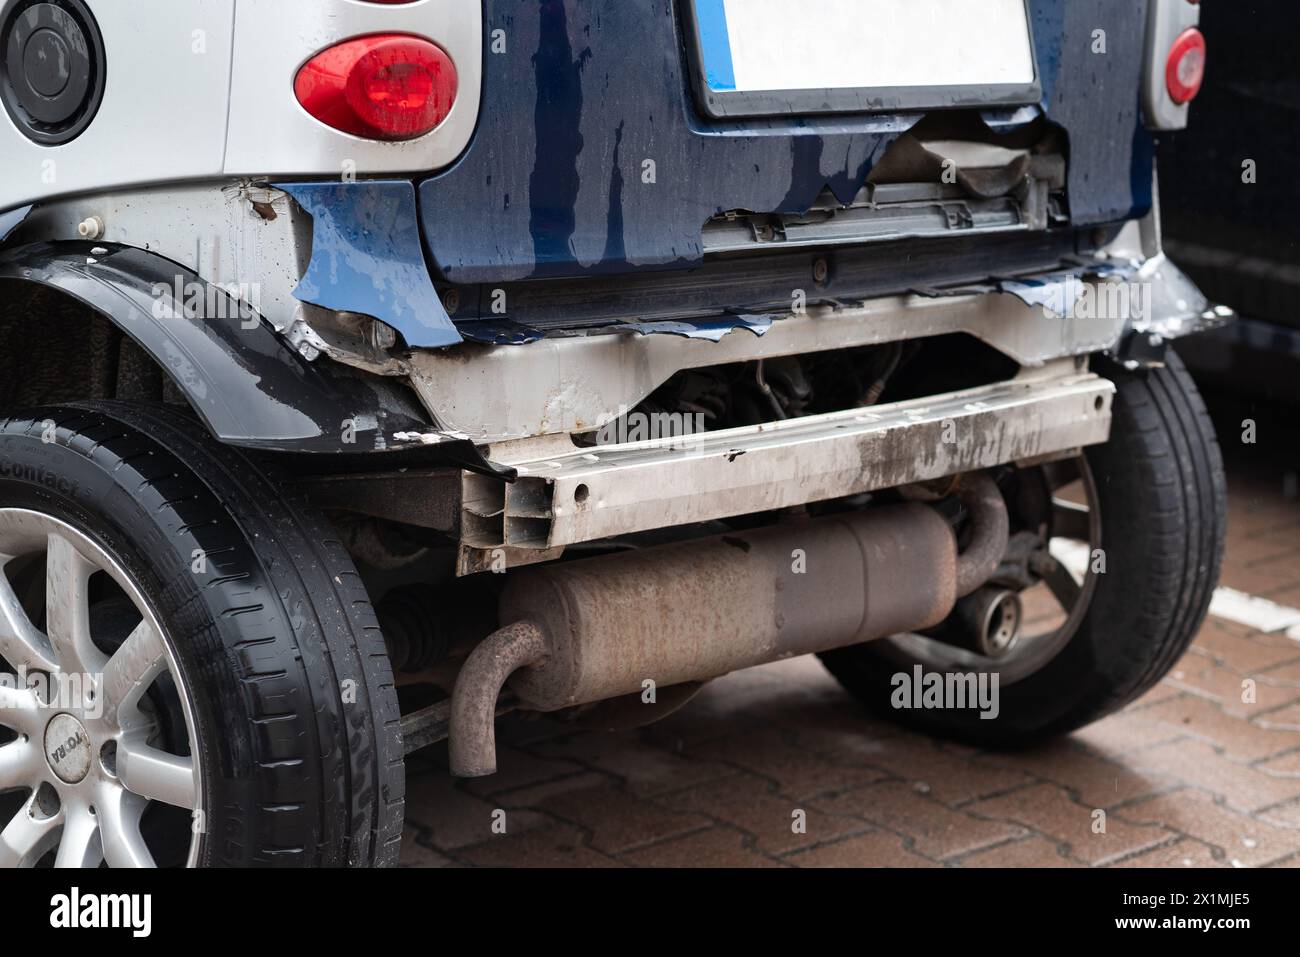 The damaged rear part of Smart car. accident consequences. broken bumper and a crumpled car body close-up Stock Photo